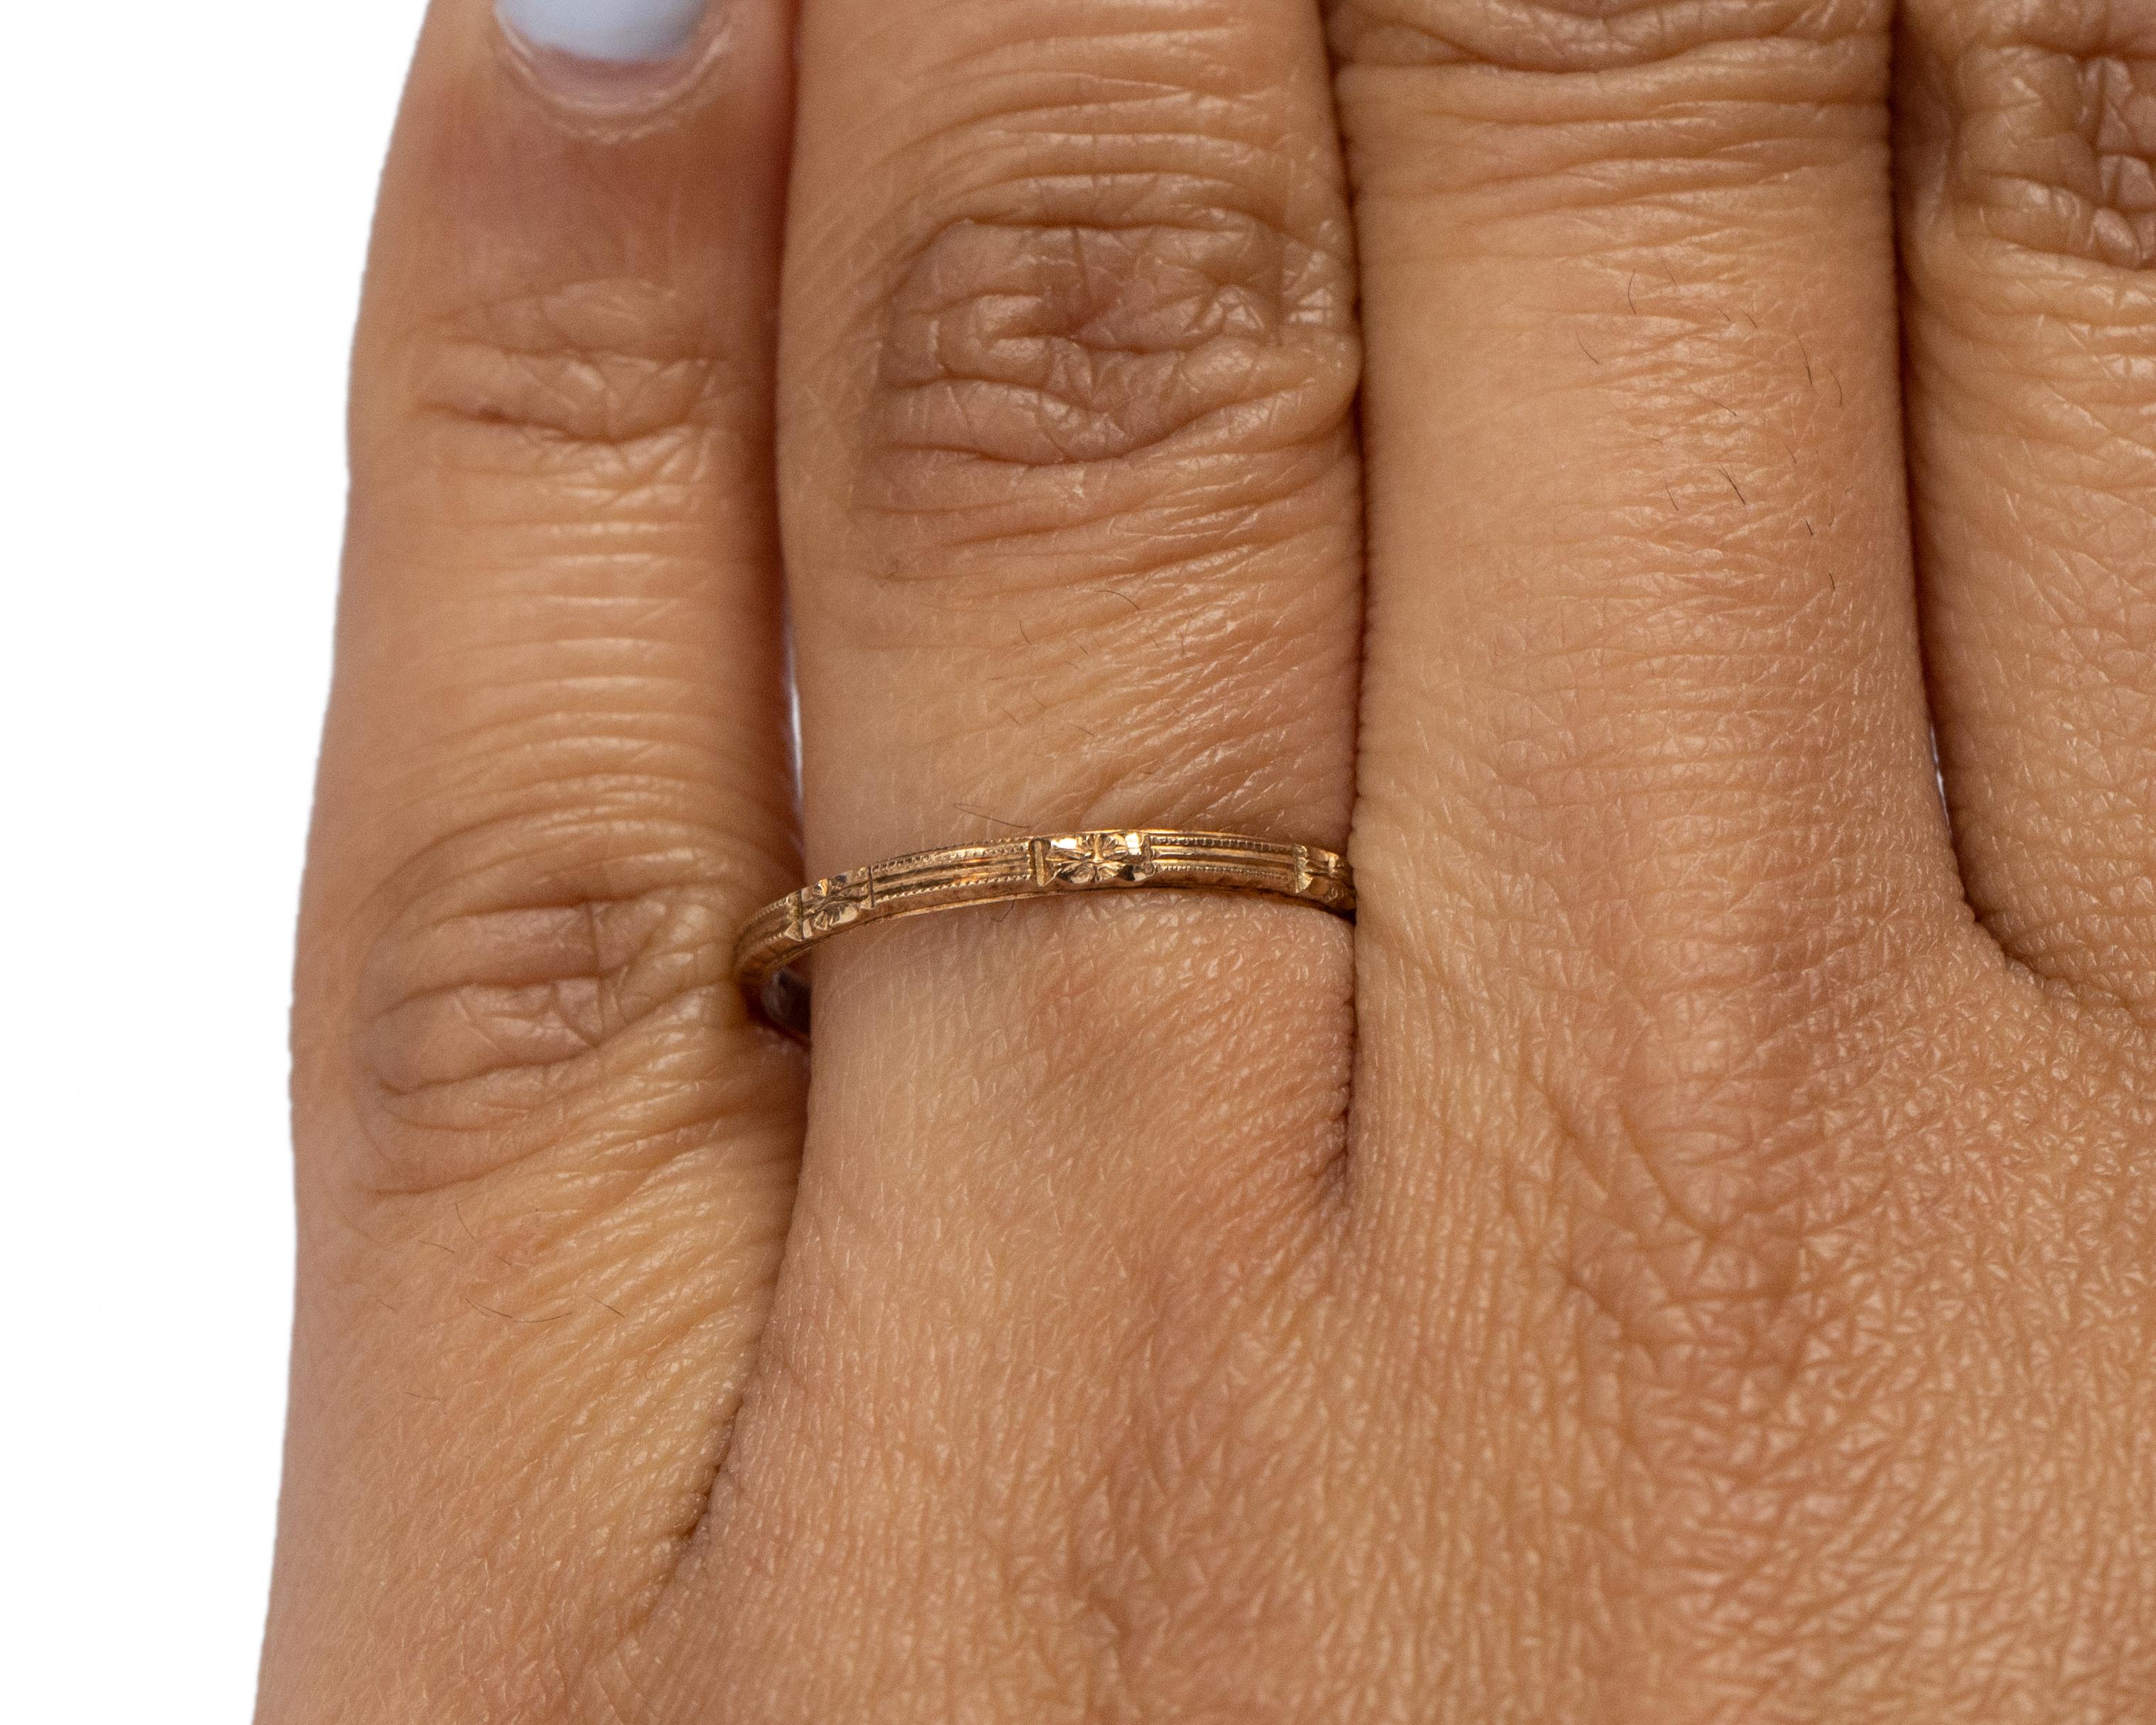 Item Details: 
Ring Size: 7
Metal Type: 10 karat yellow gold [Hallmarked, and Tested]
Weight: 1.0 grams

Finger to Top of Stone Measurement: 1.5 mm
Condition: Excellent